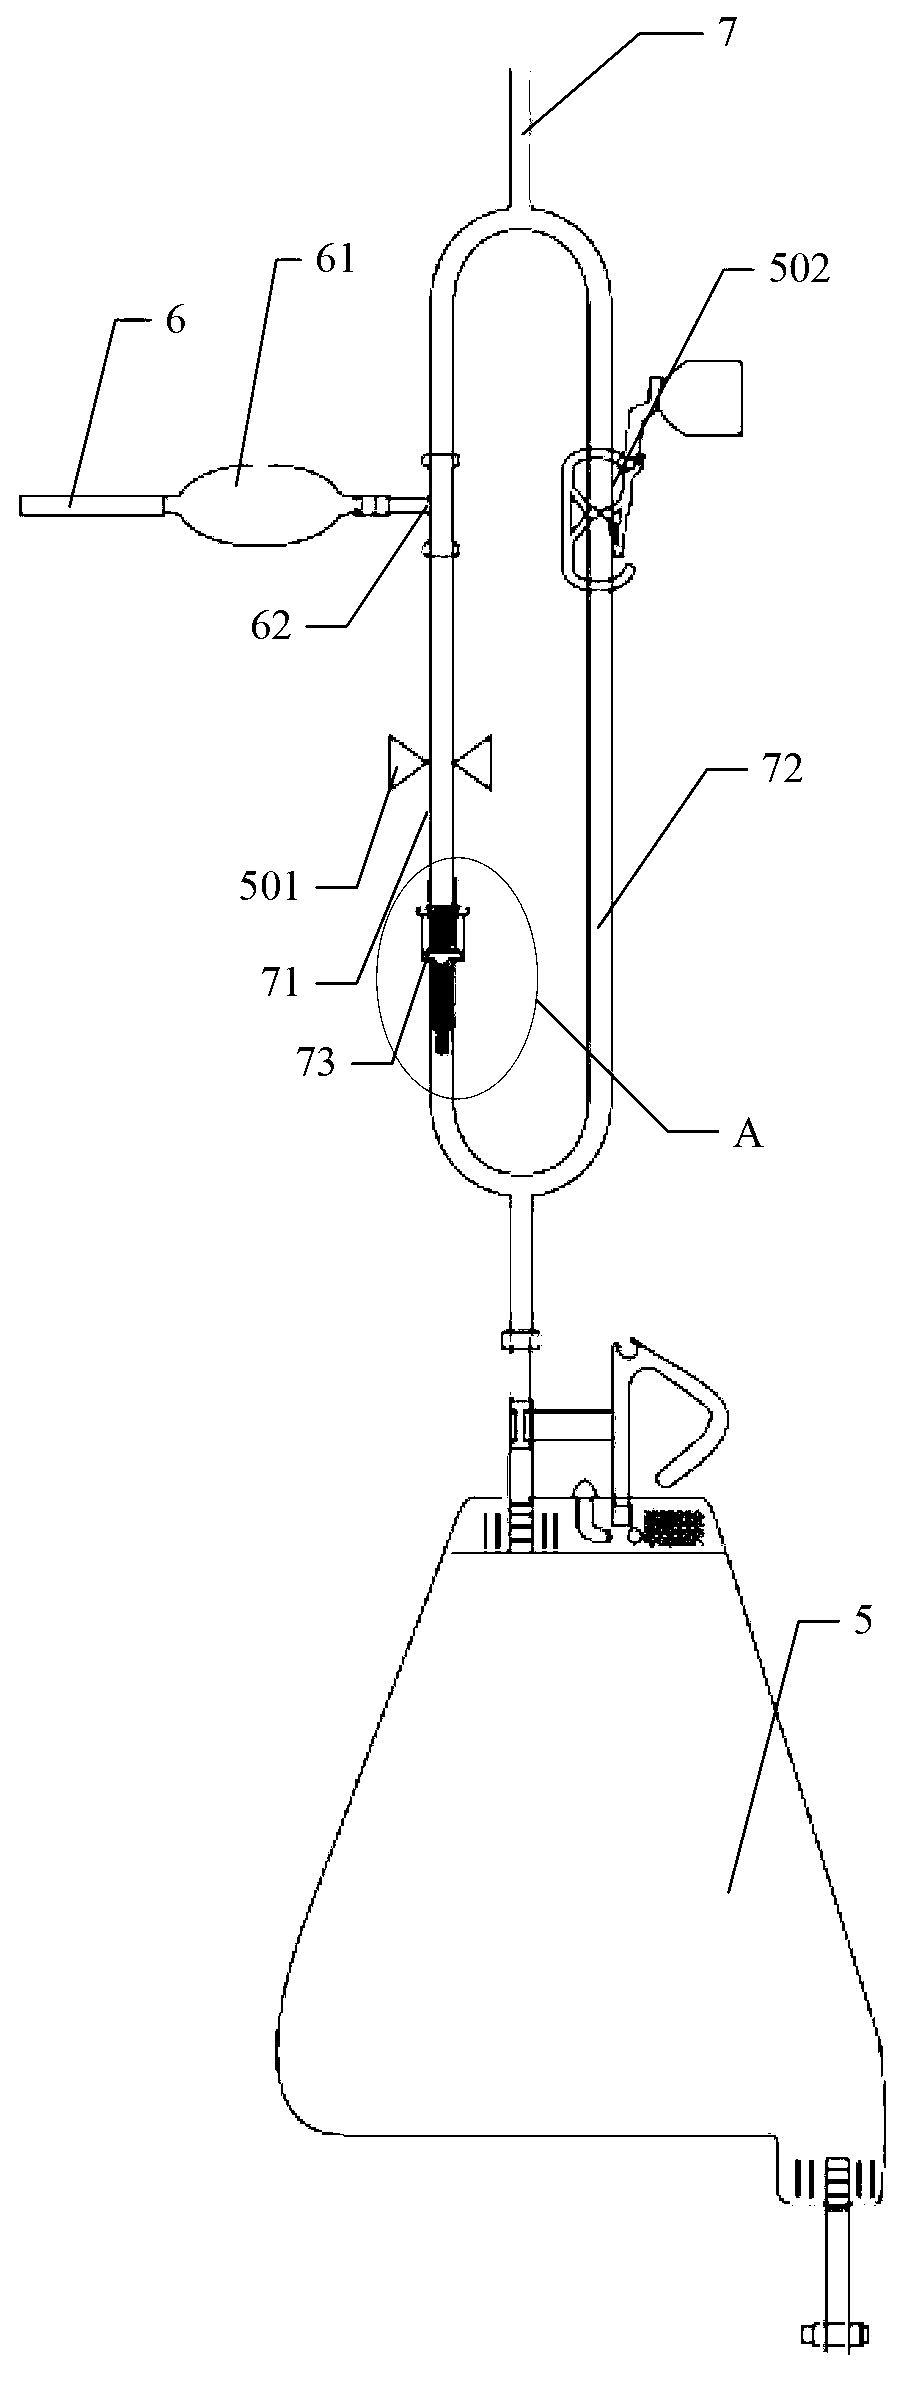 Urethral catheterization device and abdominal pressure monitoring system